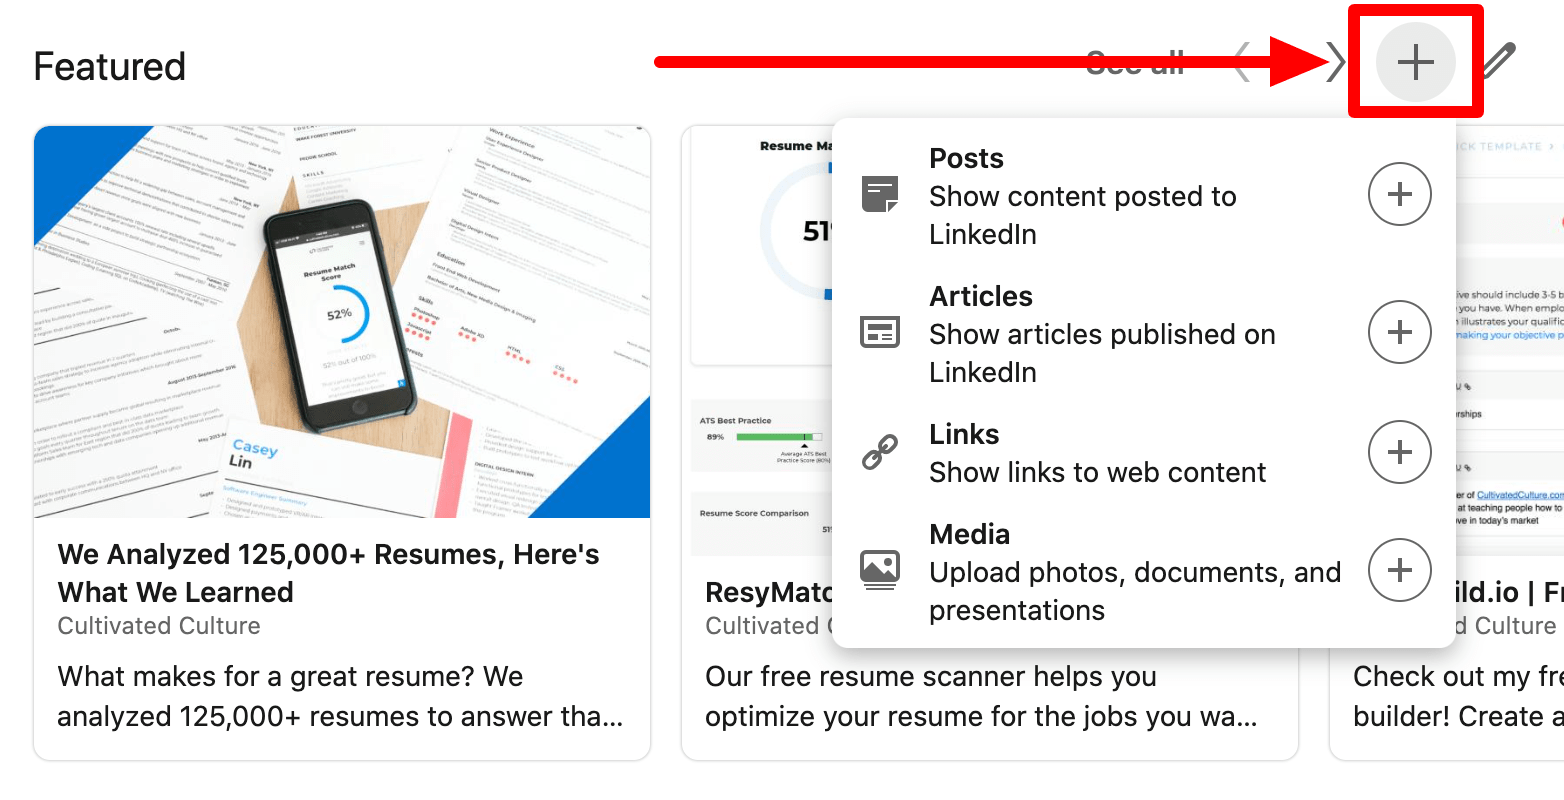 How To Add Content To Your LinkedIn Featured Section